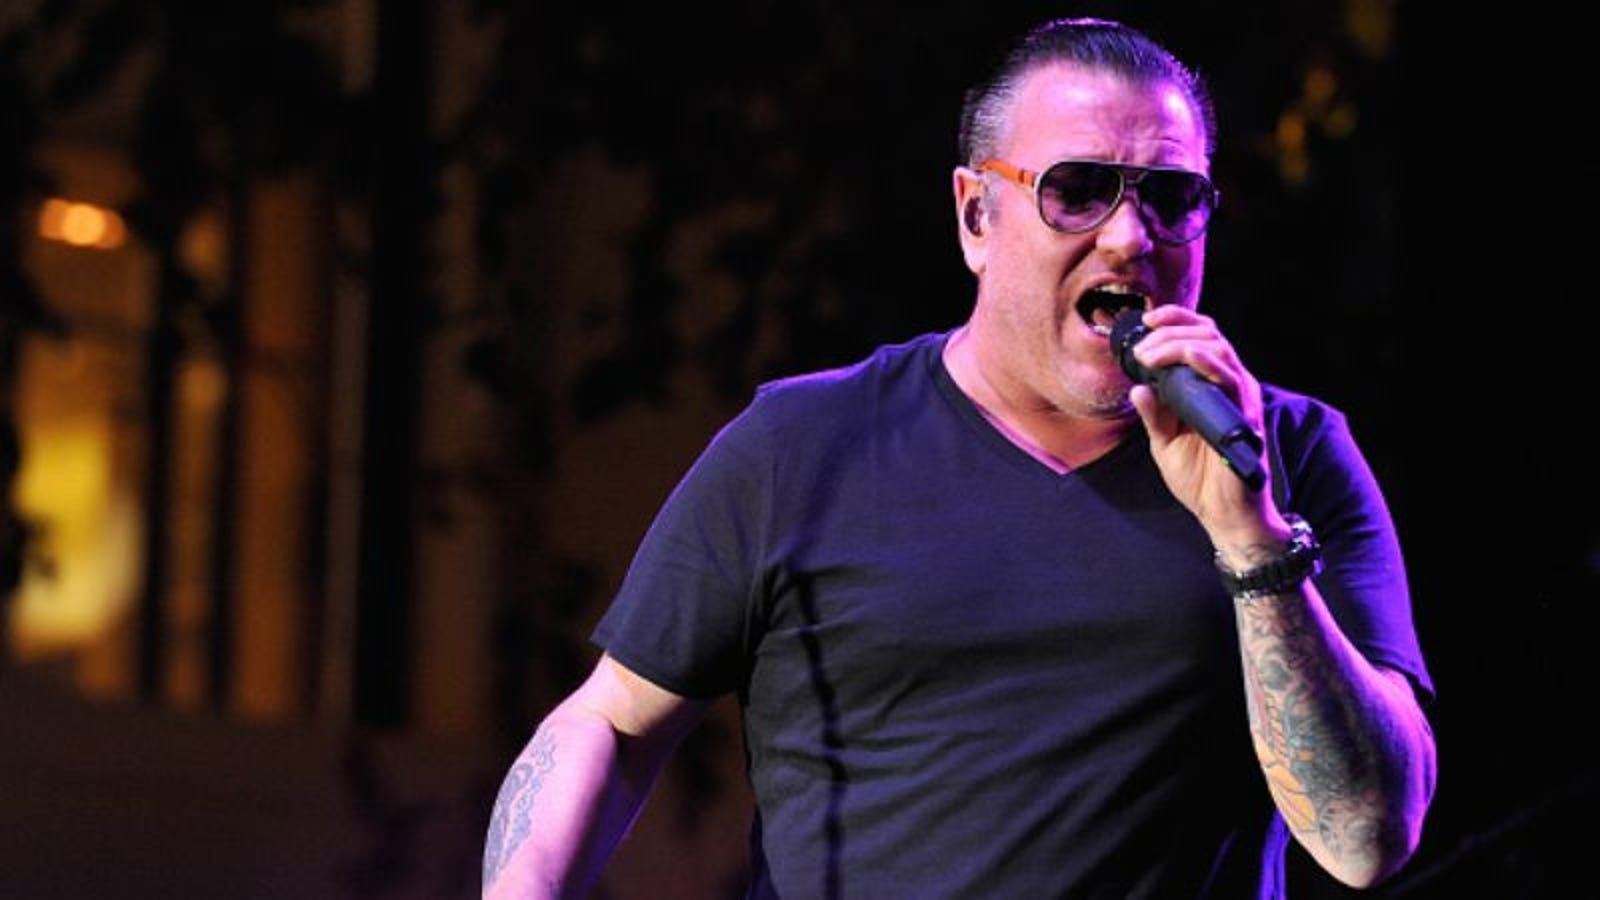 Smash Mouth frontman Steve Harwell is recovering after collapsing on stage